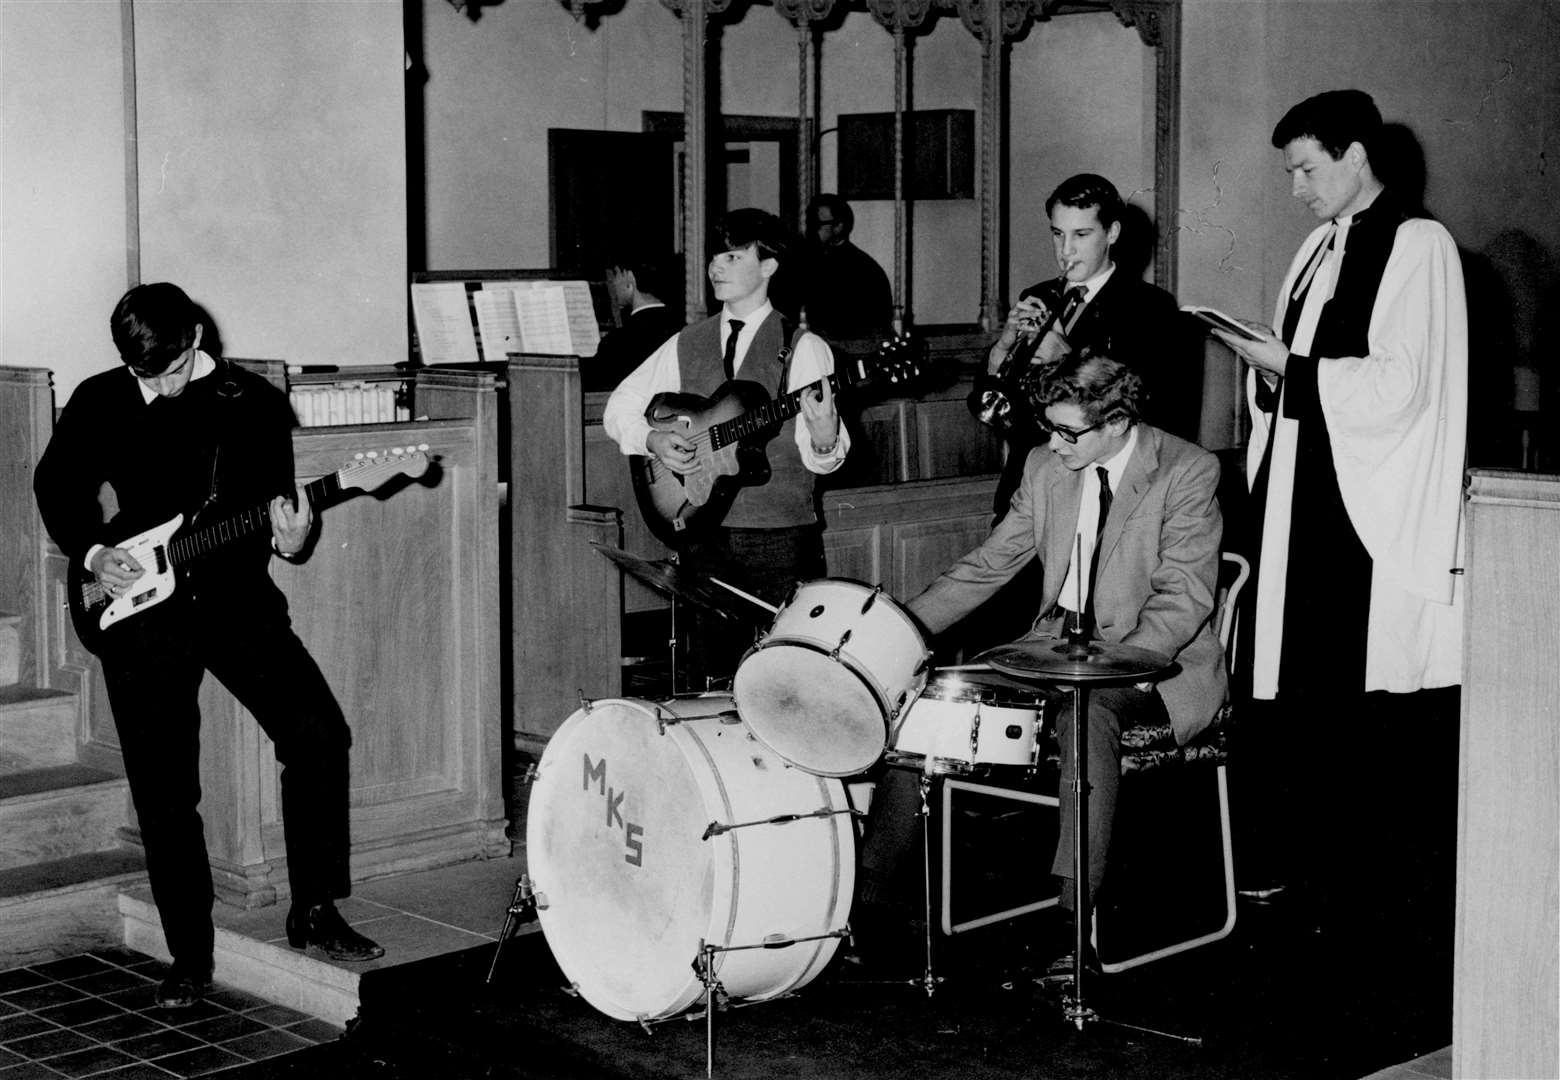 'Something never seen before in Canterbury,' reported the Kentish Gazette in February 1965. An 'Off-Beat Youth Service' in St Mary Bredin Church heard Top 10 tunes such as I'll Never Find Another You and Downtown accompany the hymns. The curate, the Rev John Barton, looks on